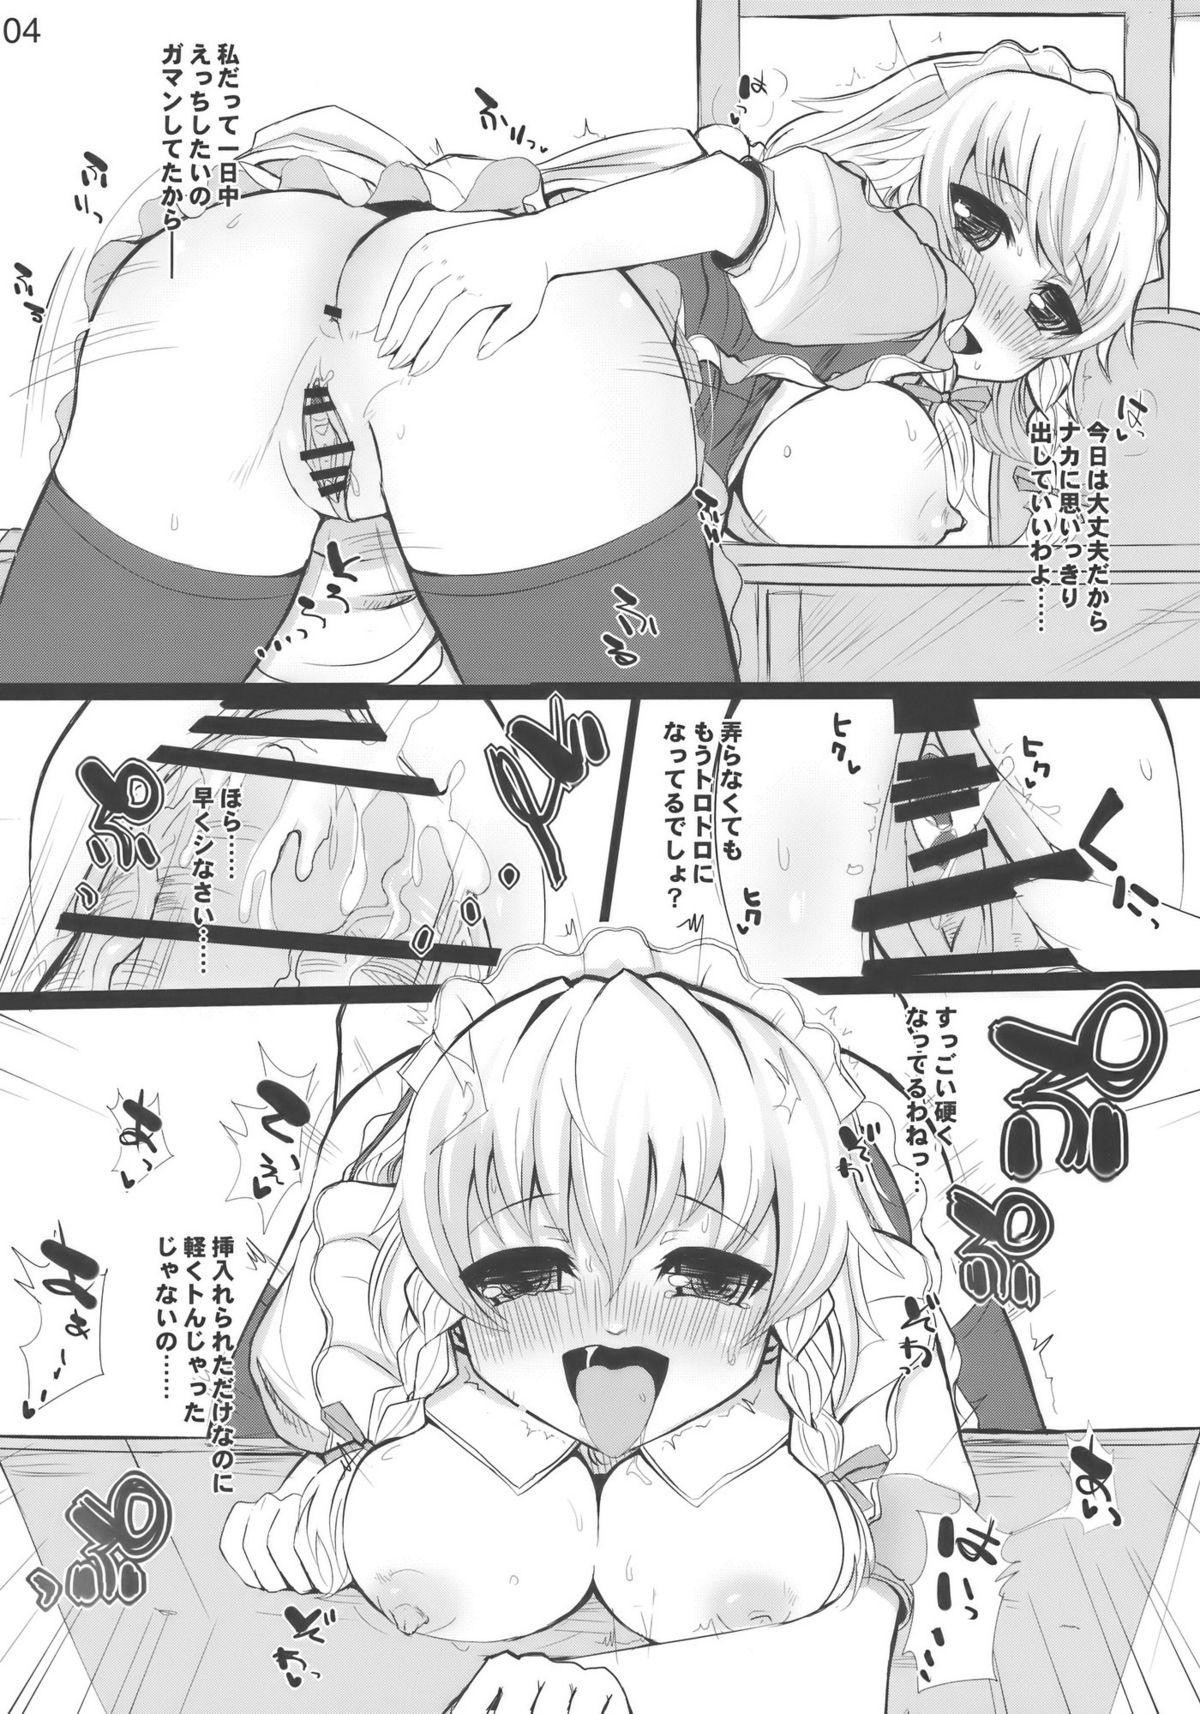 Free 18 Year Old Porn Feed me with your Kiss - Touhou project Camporn - Page 4